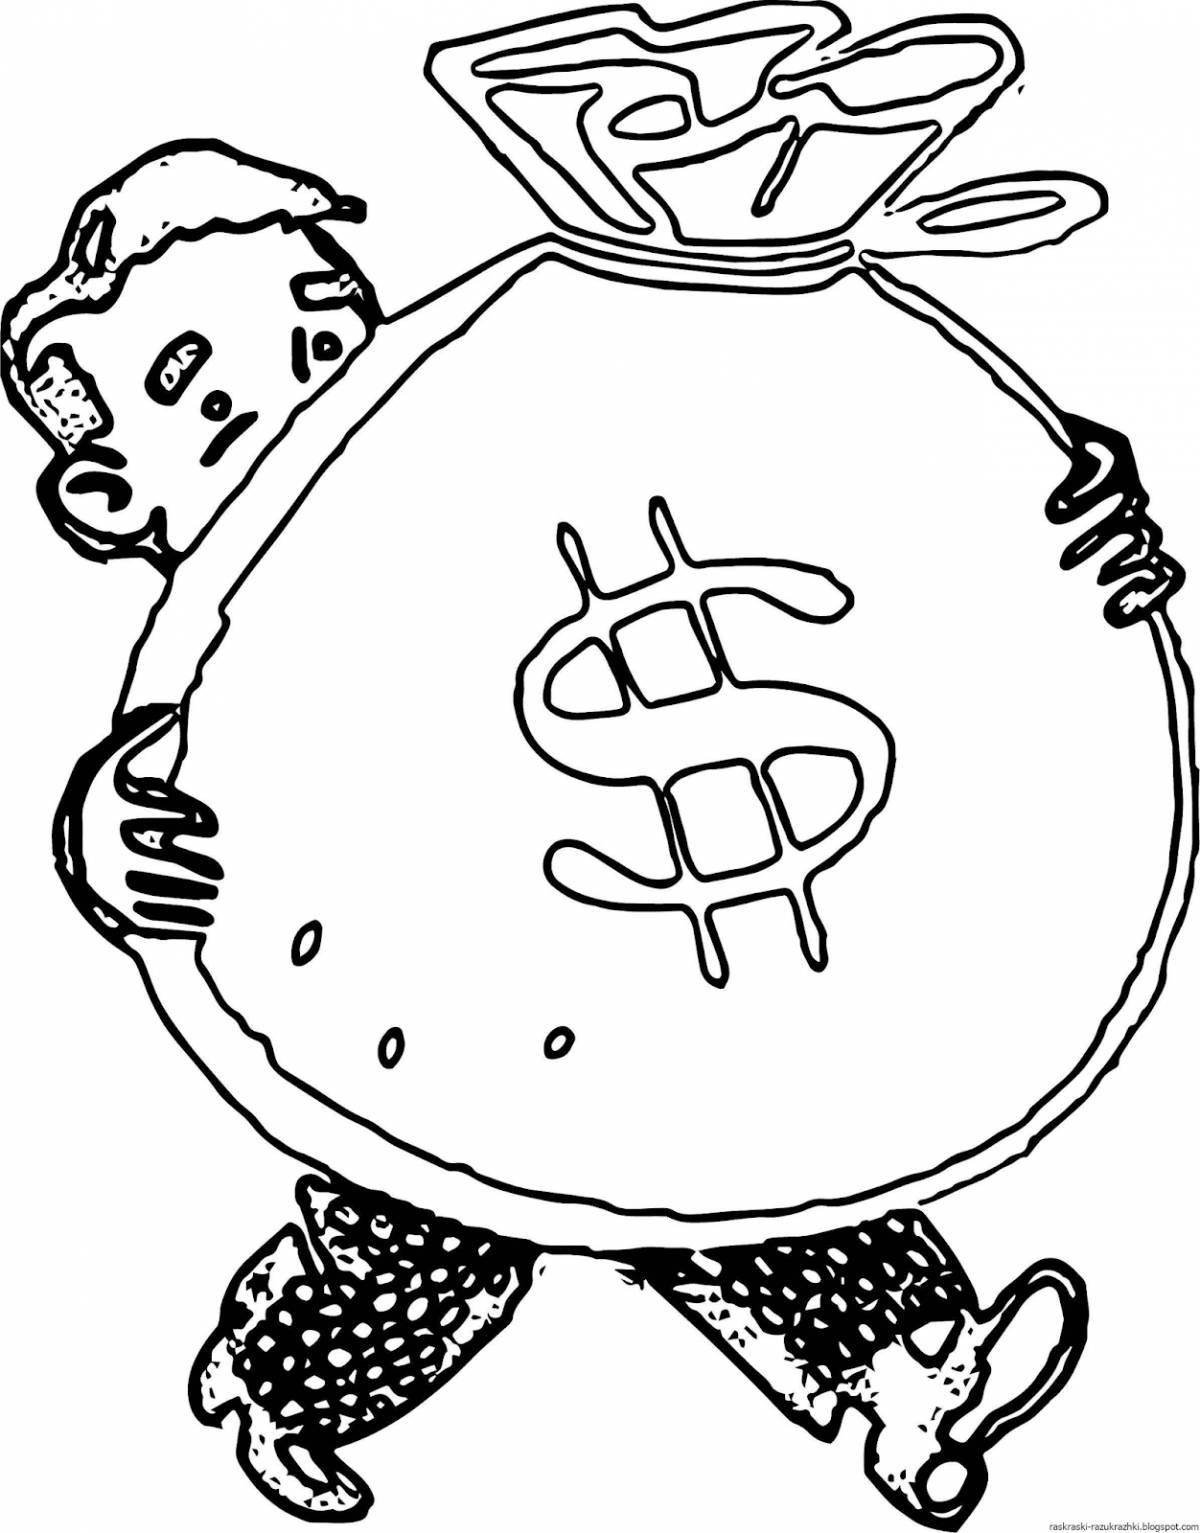 Creative financial literacy coloring page for elementary school students